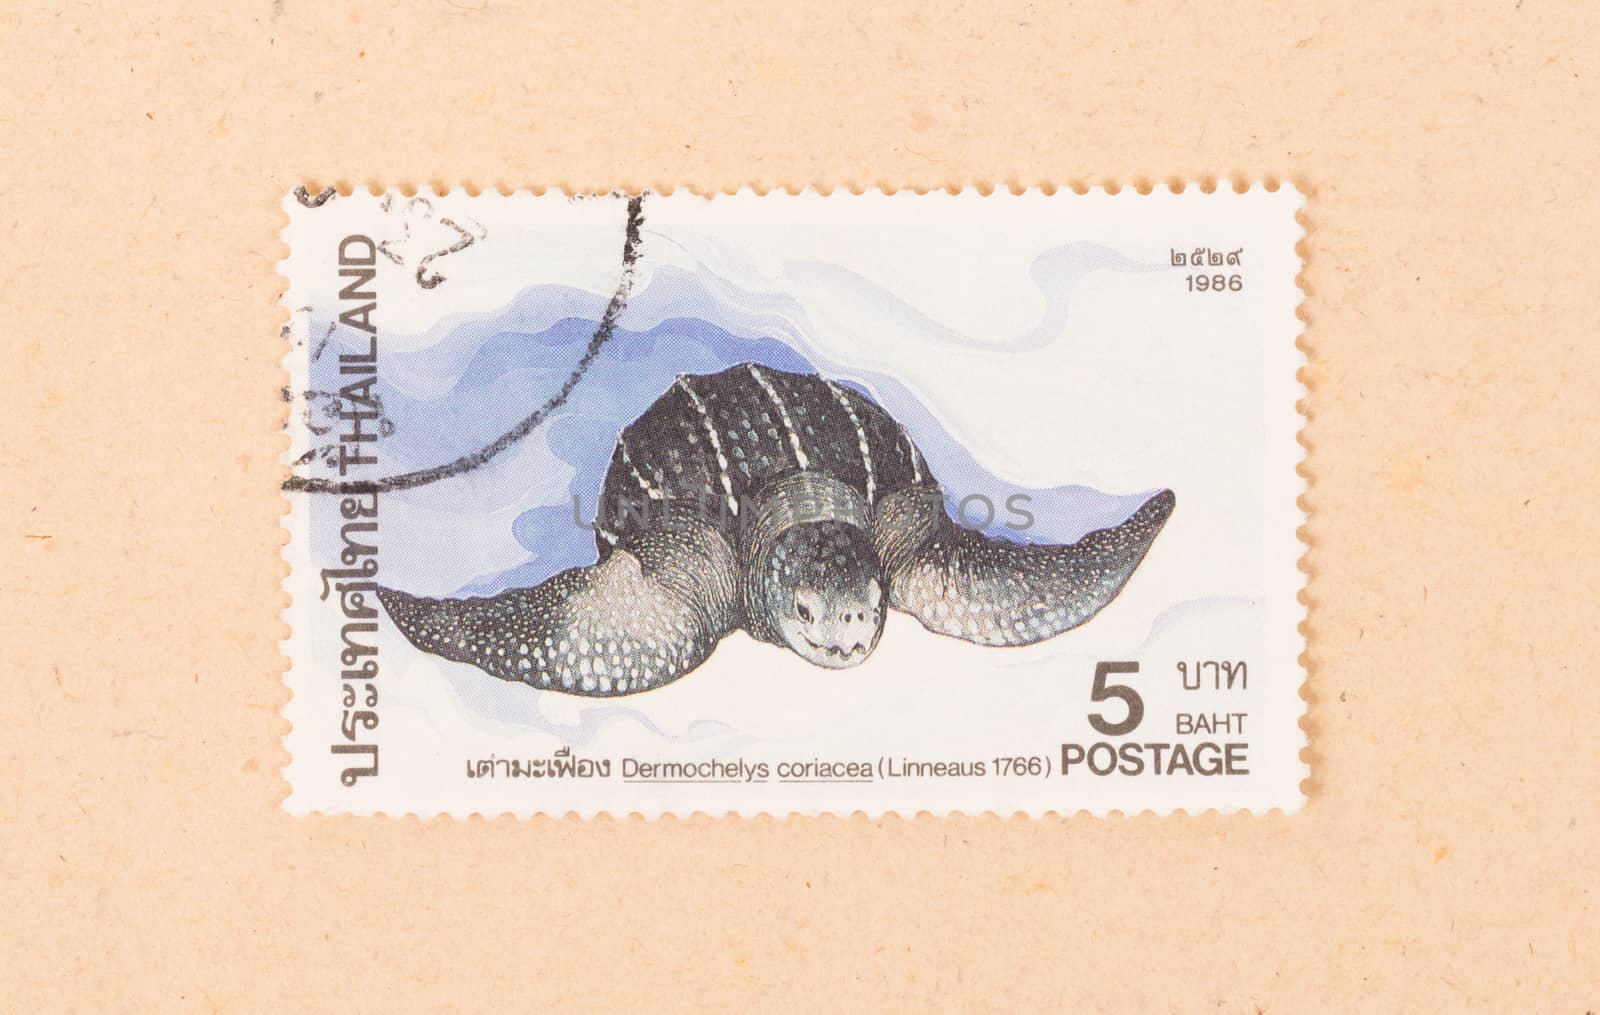 THAILAND - CIRCA 1986: A stamp printed in Thailand shows a turtl by michaklootwijk